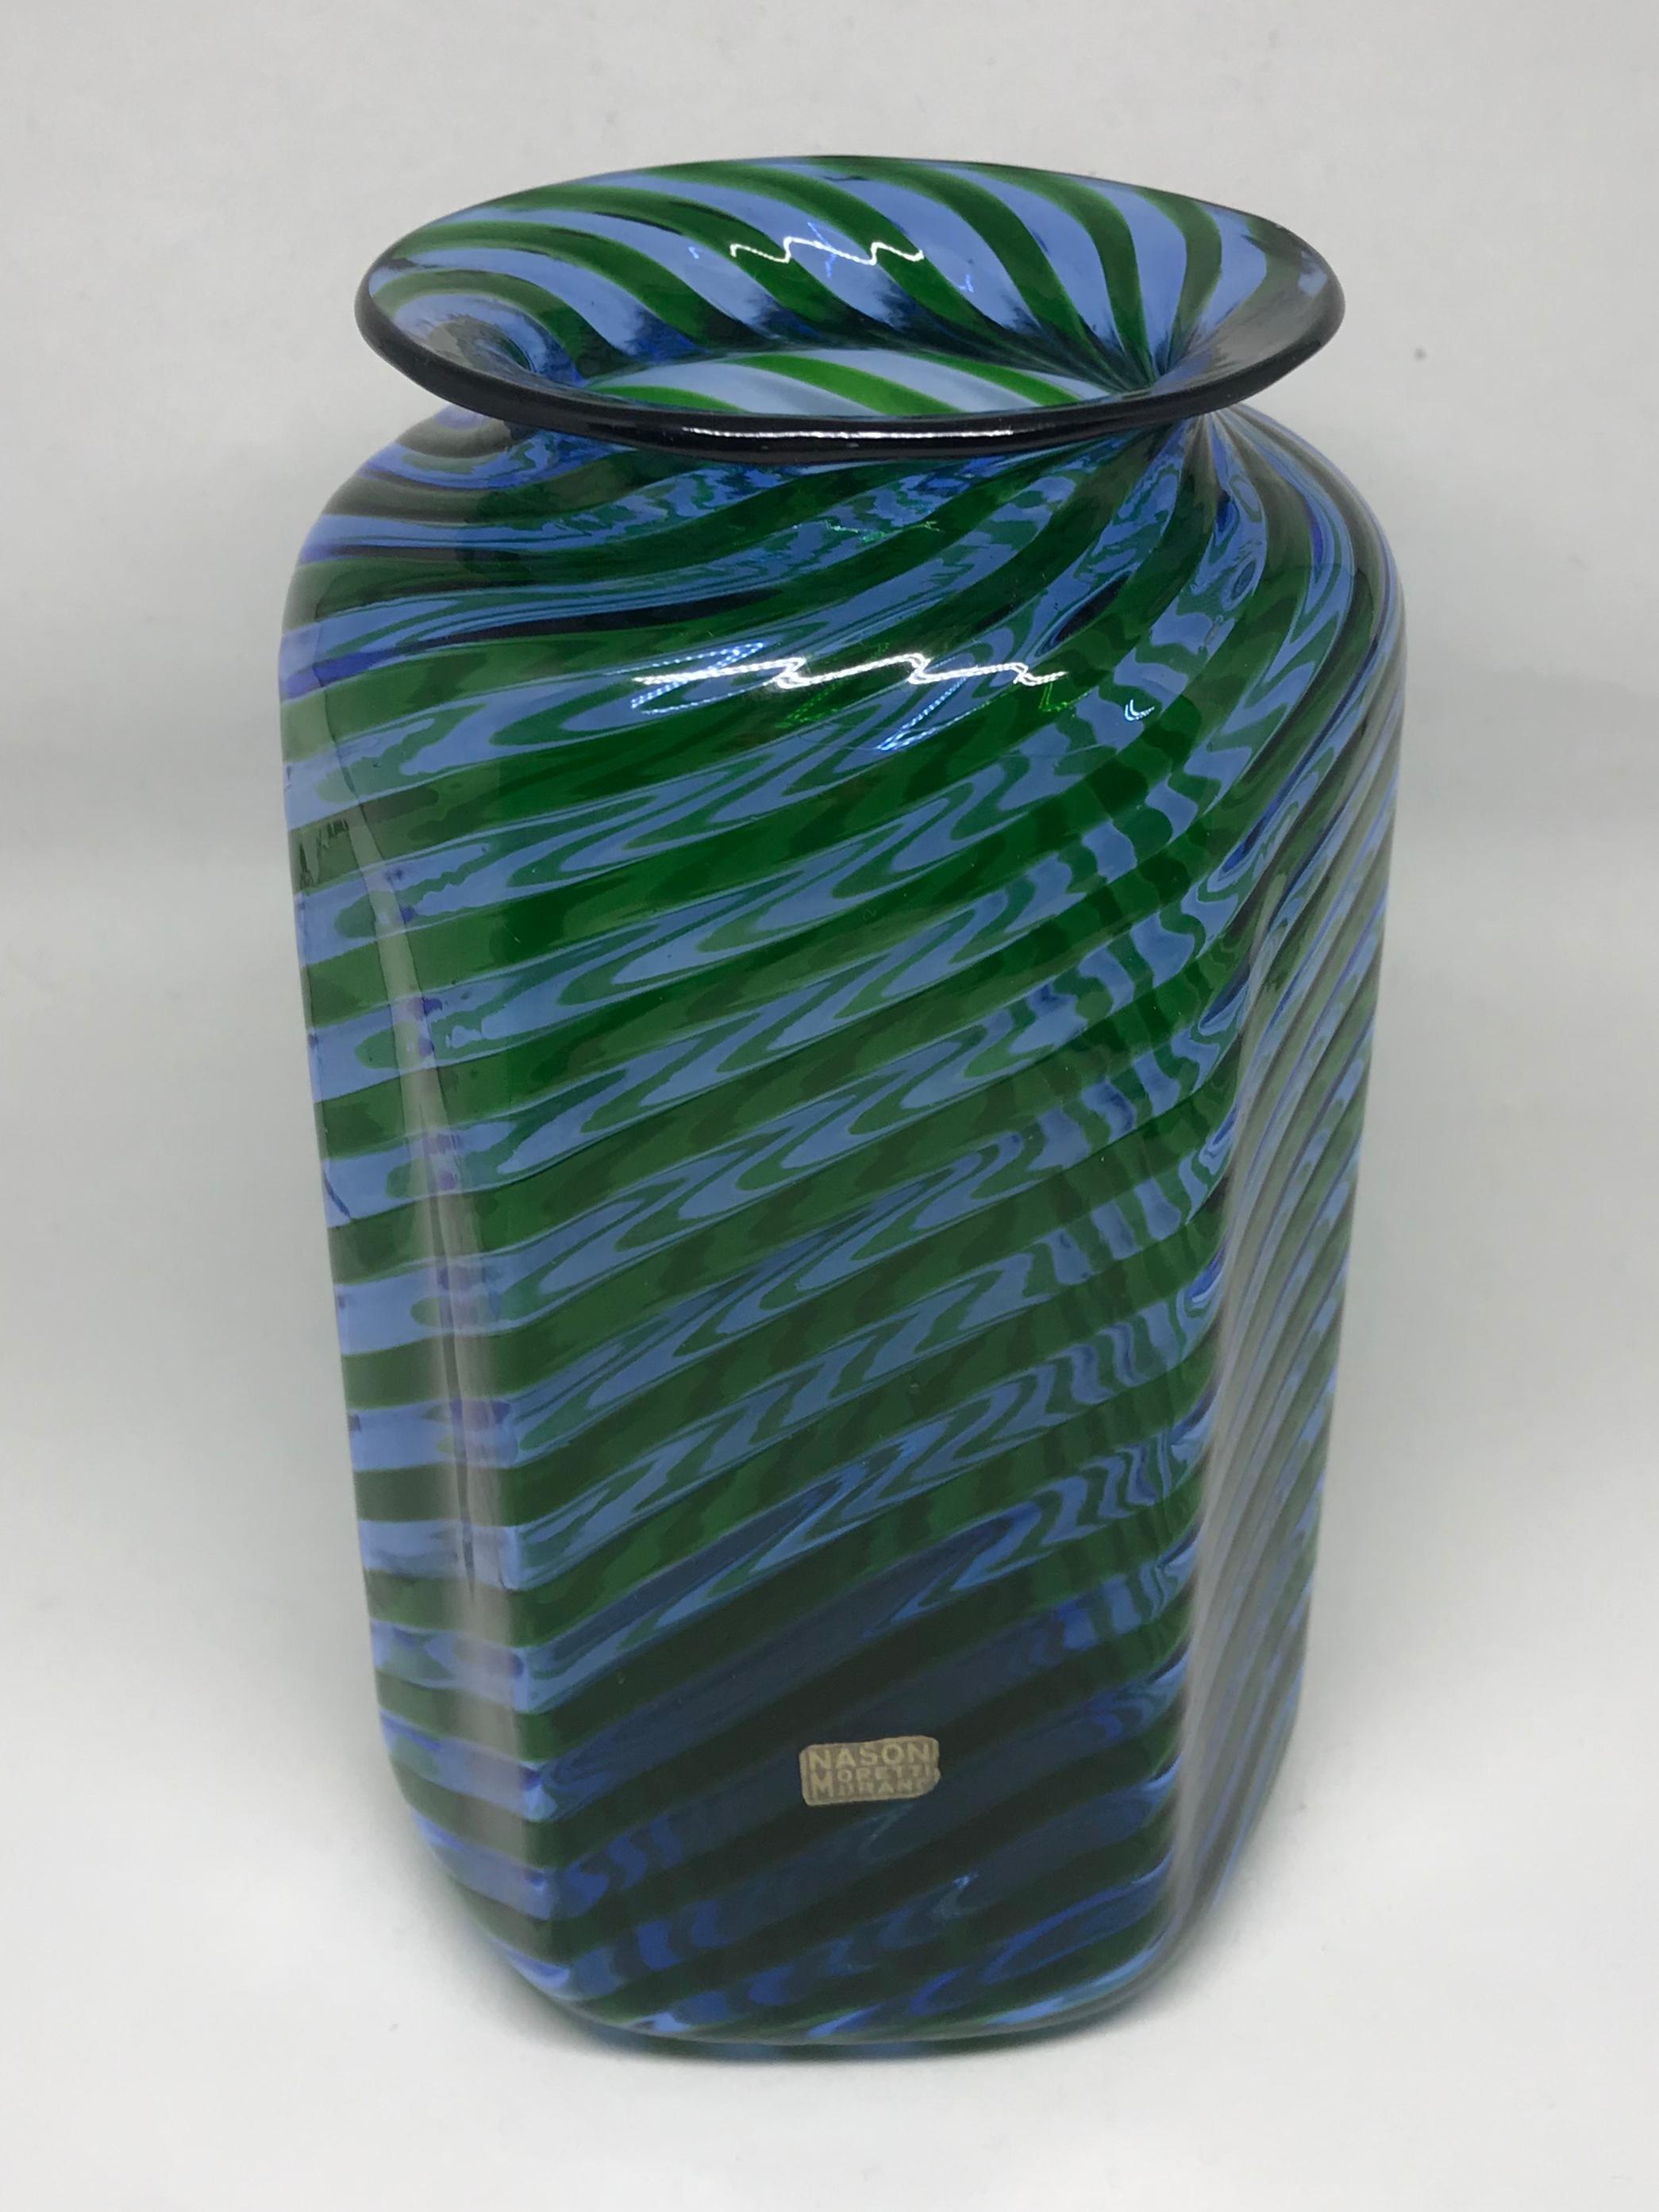 Blue green Nason Moretti Murano vase. Pale blue and green striped softly hexagonal vase with swirled neck and original Nason Moretti Murano label. Italy, circa 1940.
Dimensions: 4.5